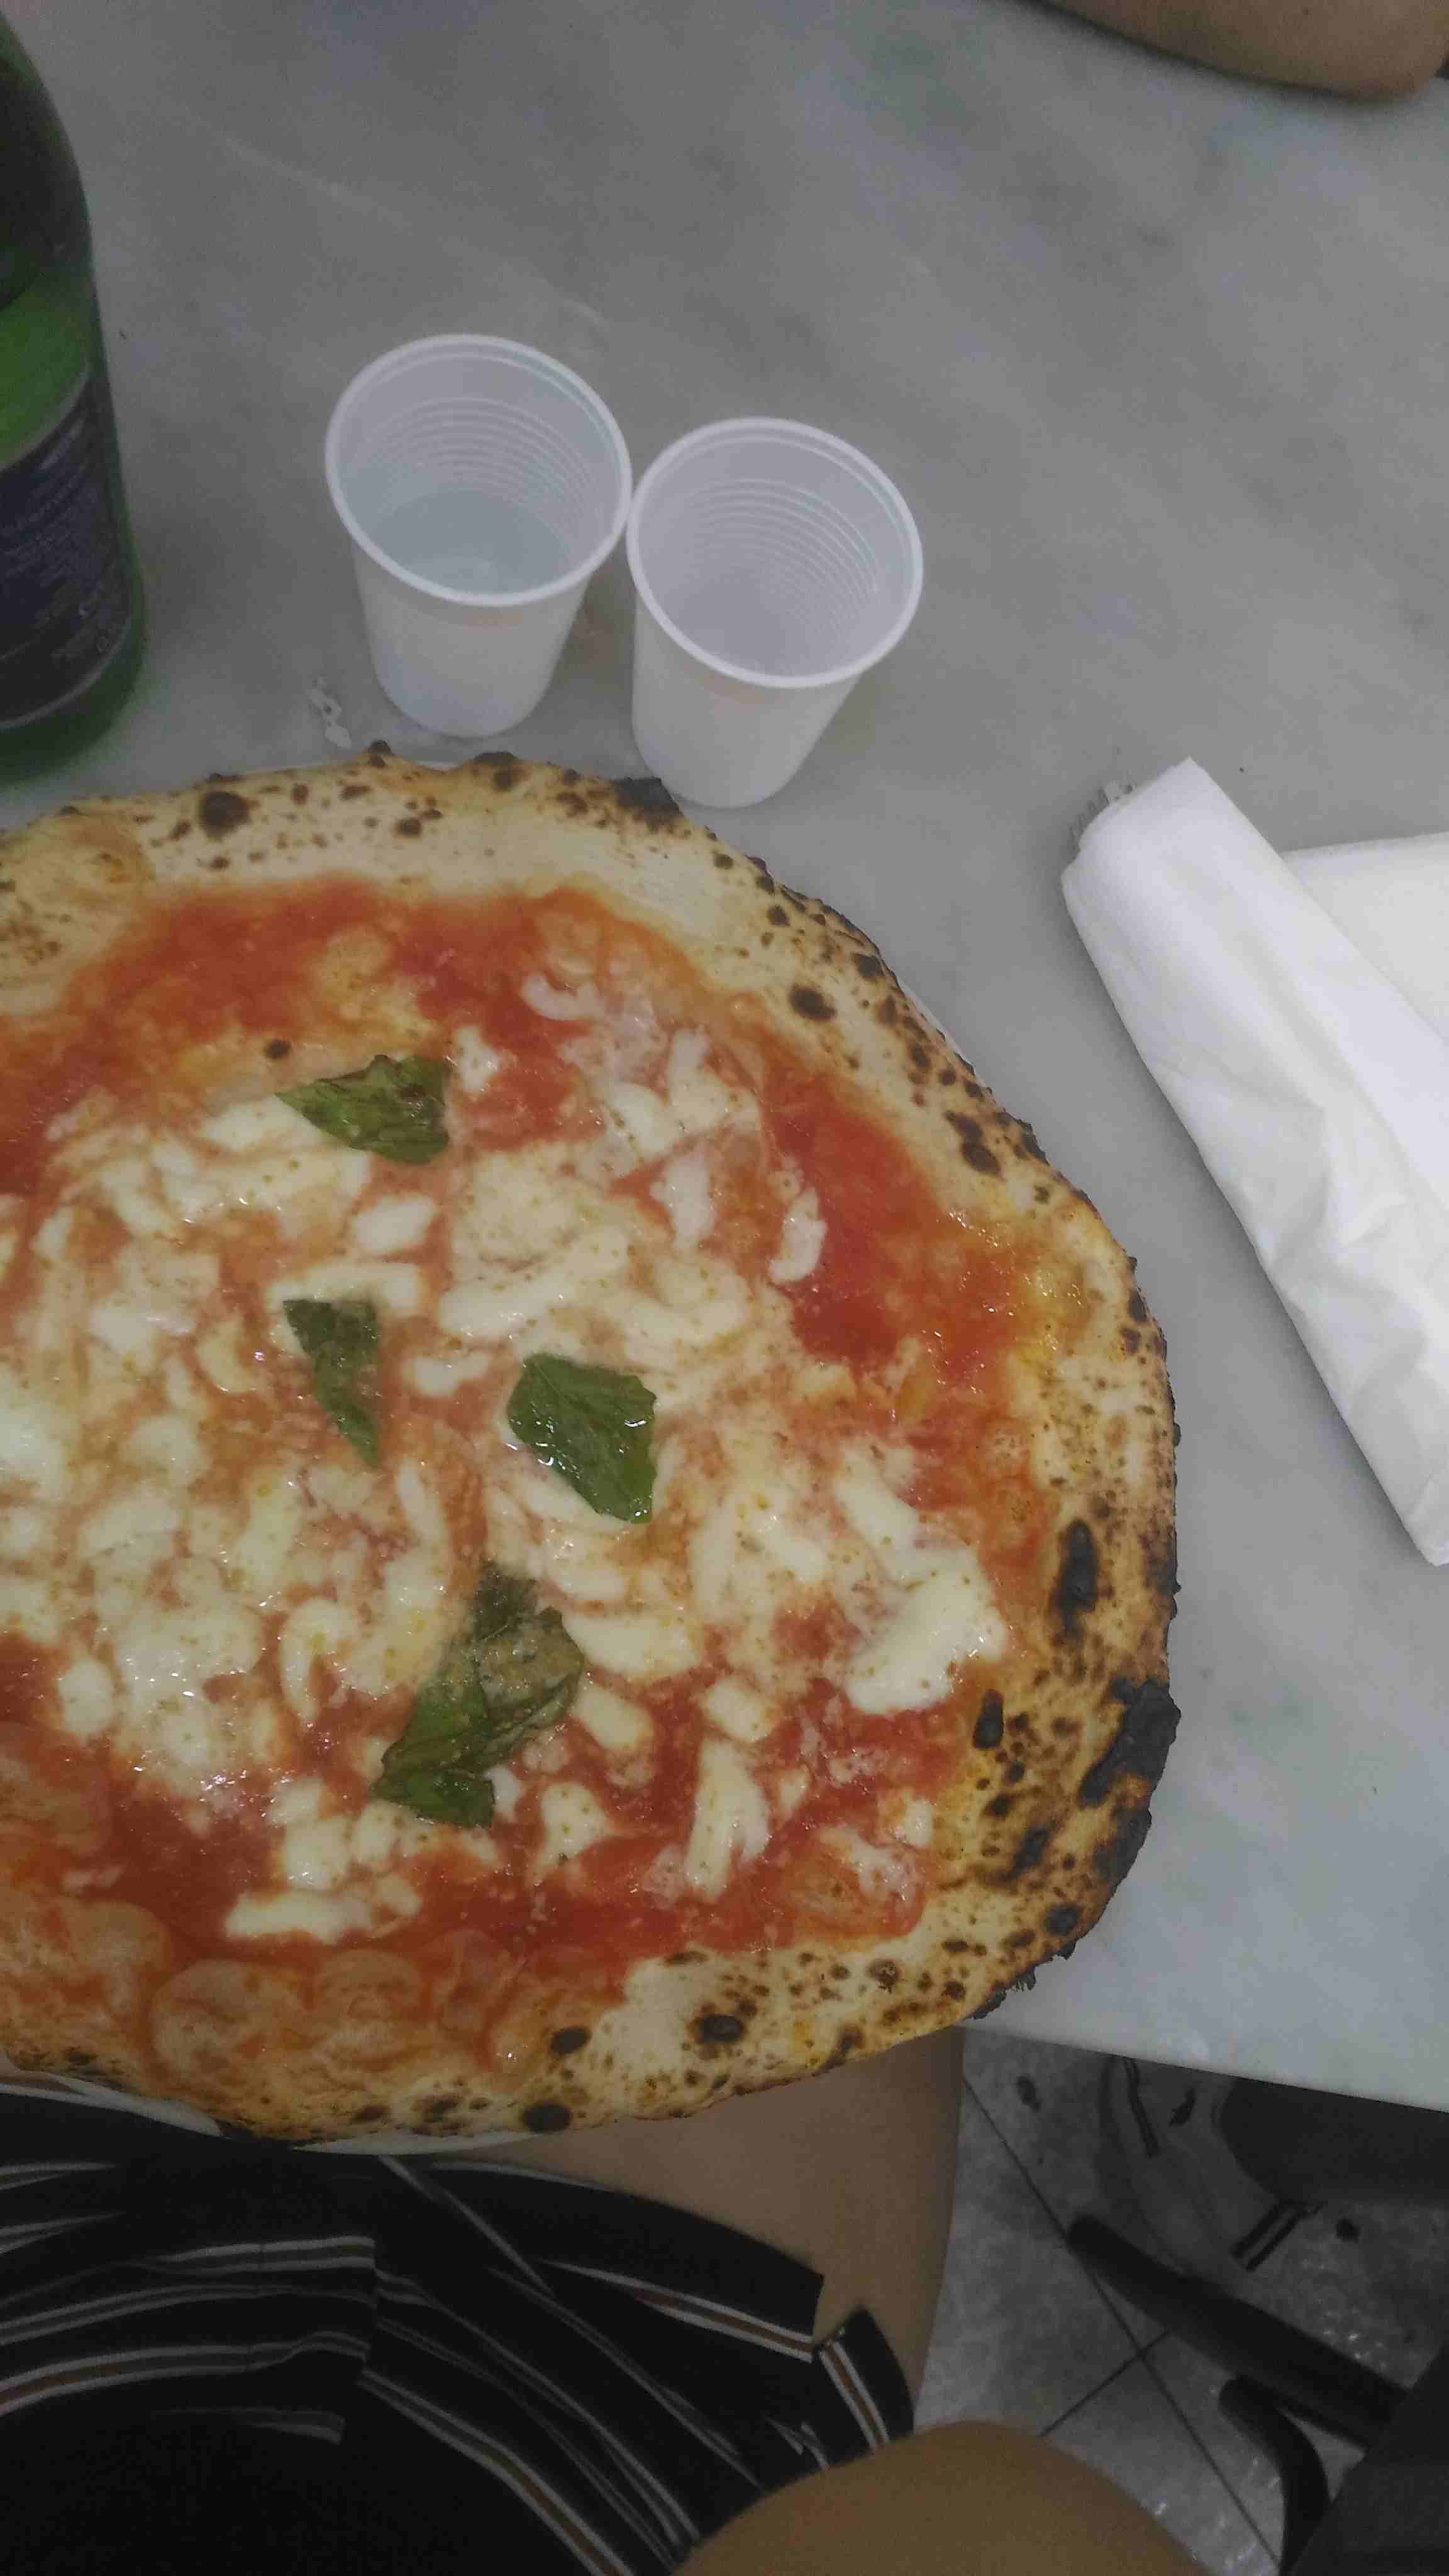 Another best margherita in the world.